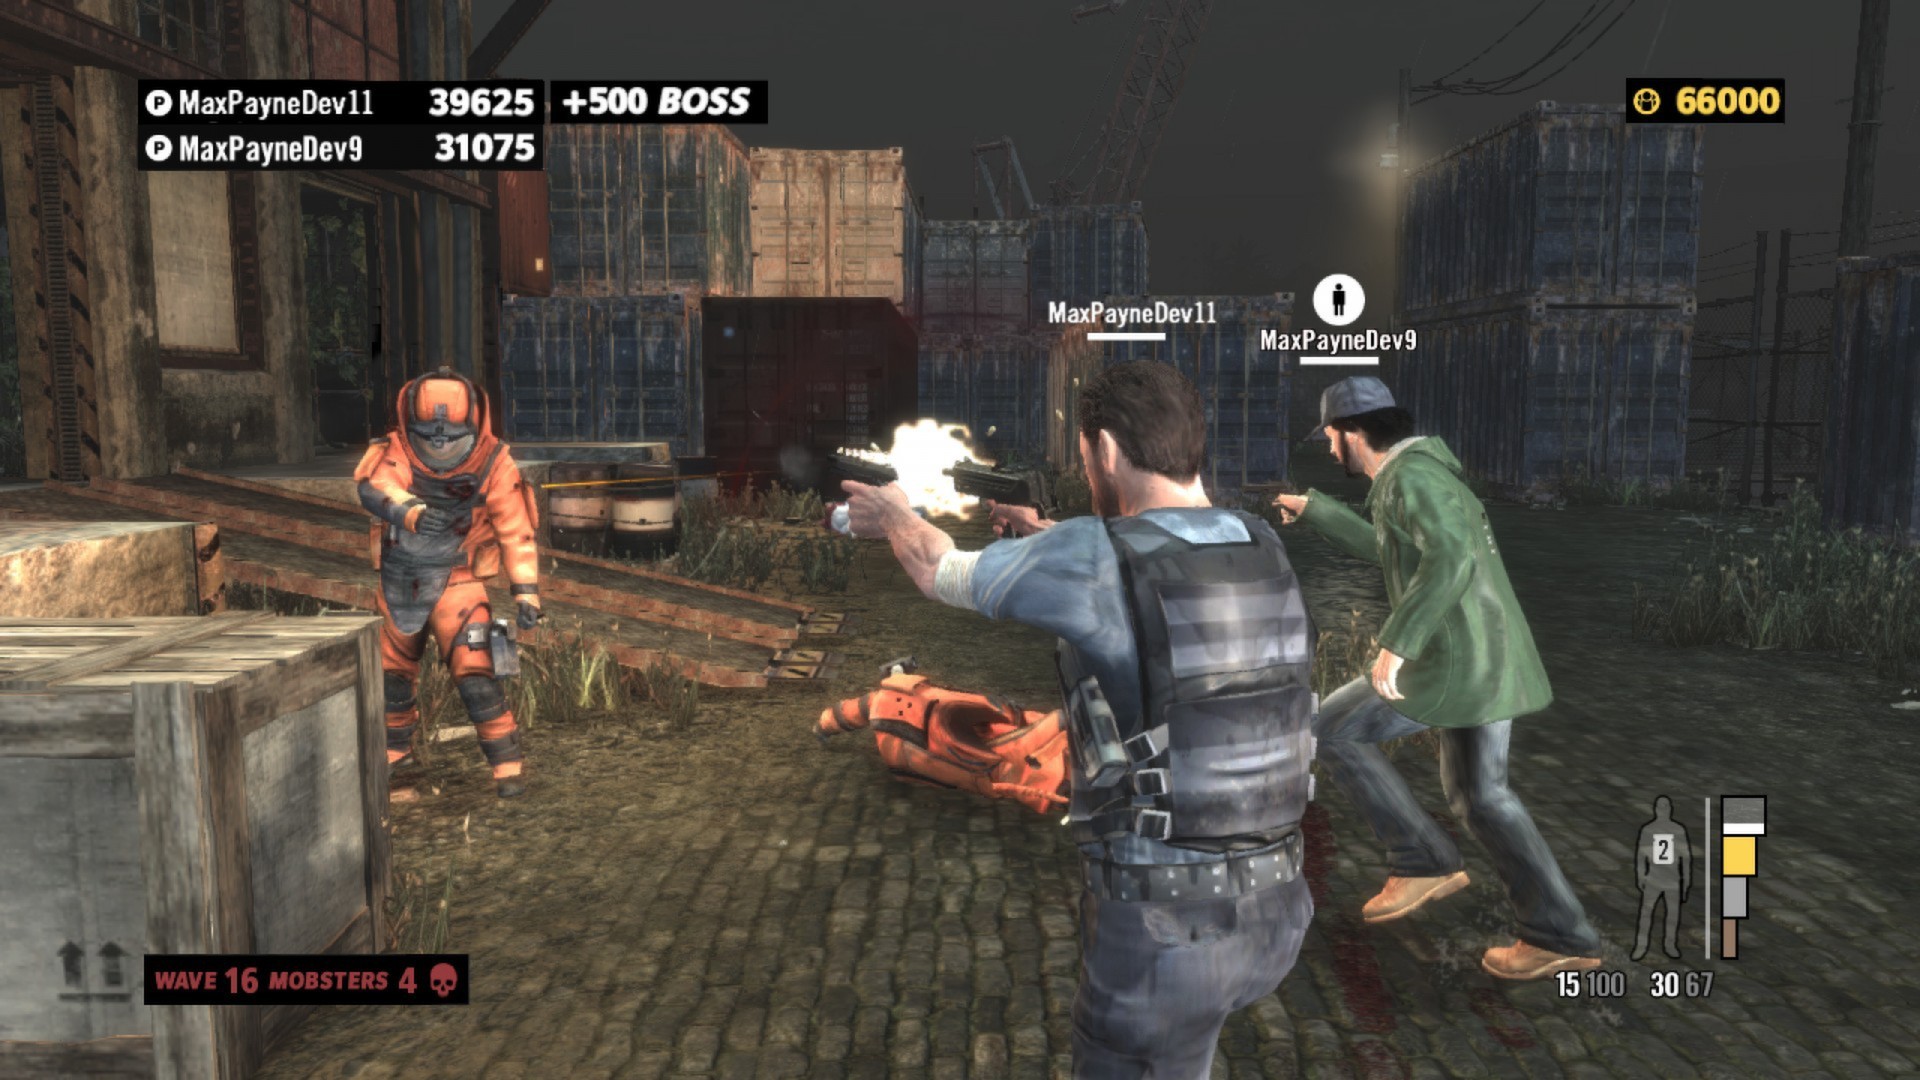 max payne 3 download to continue playing story